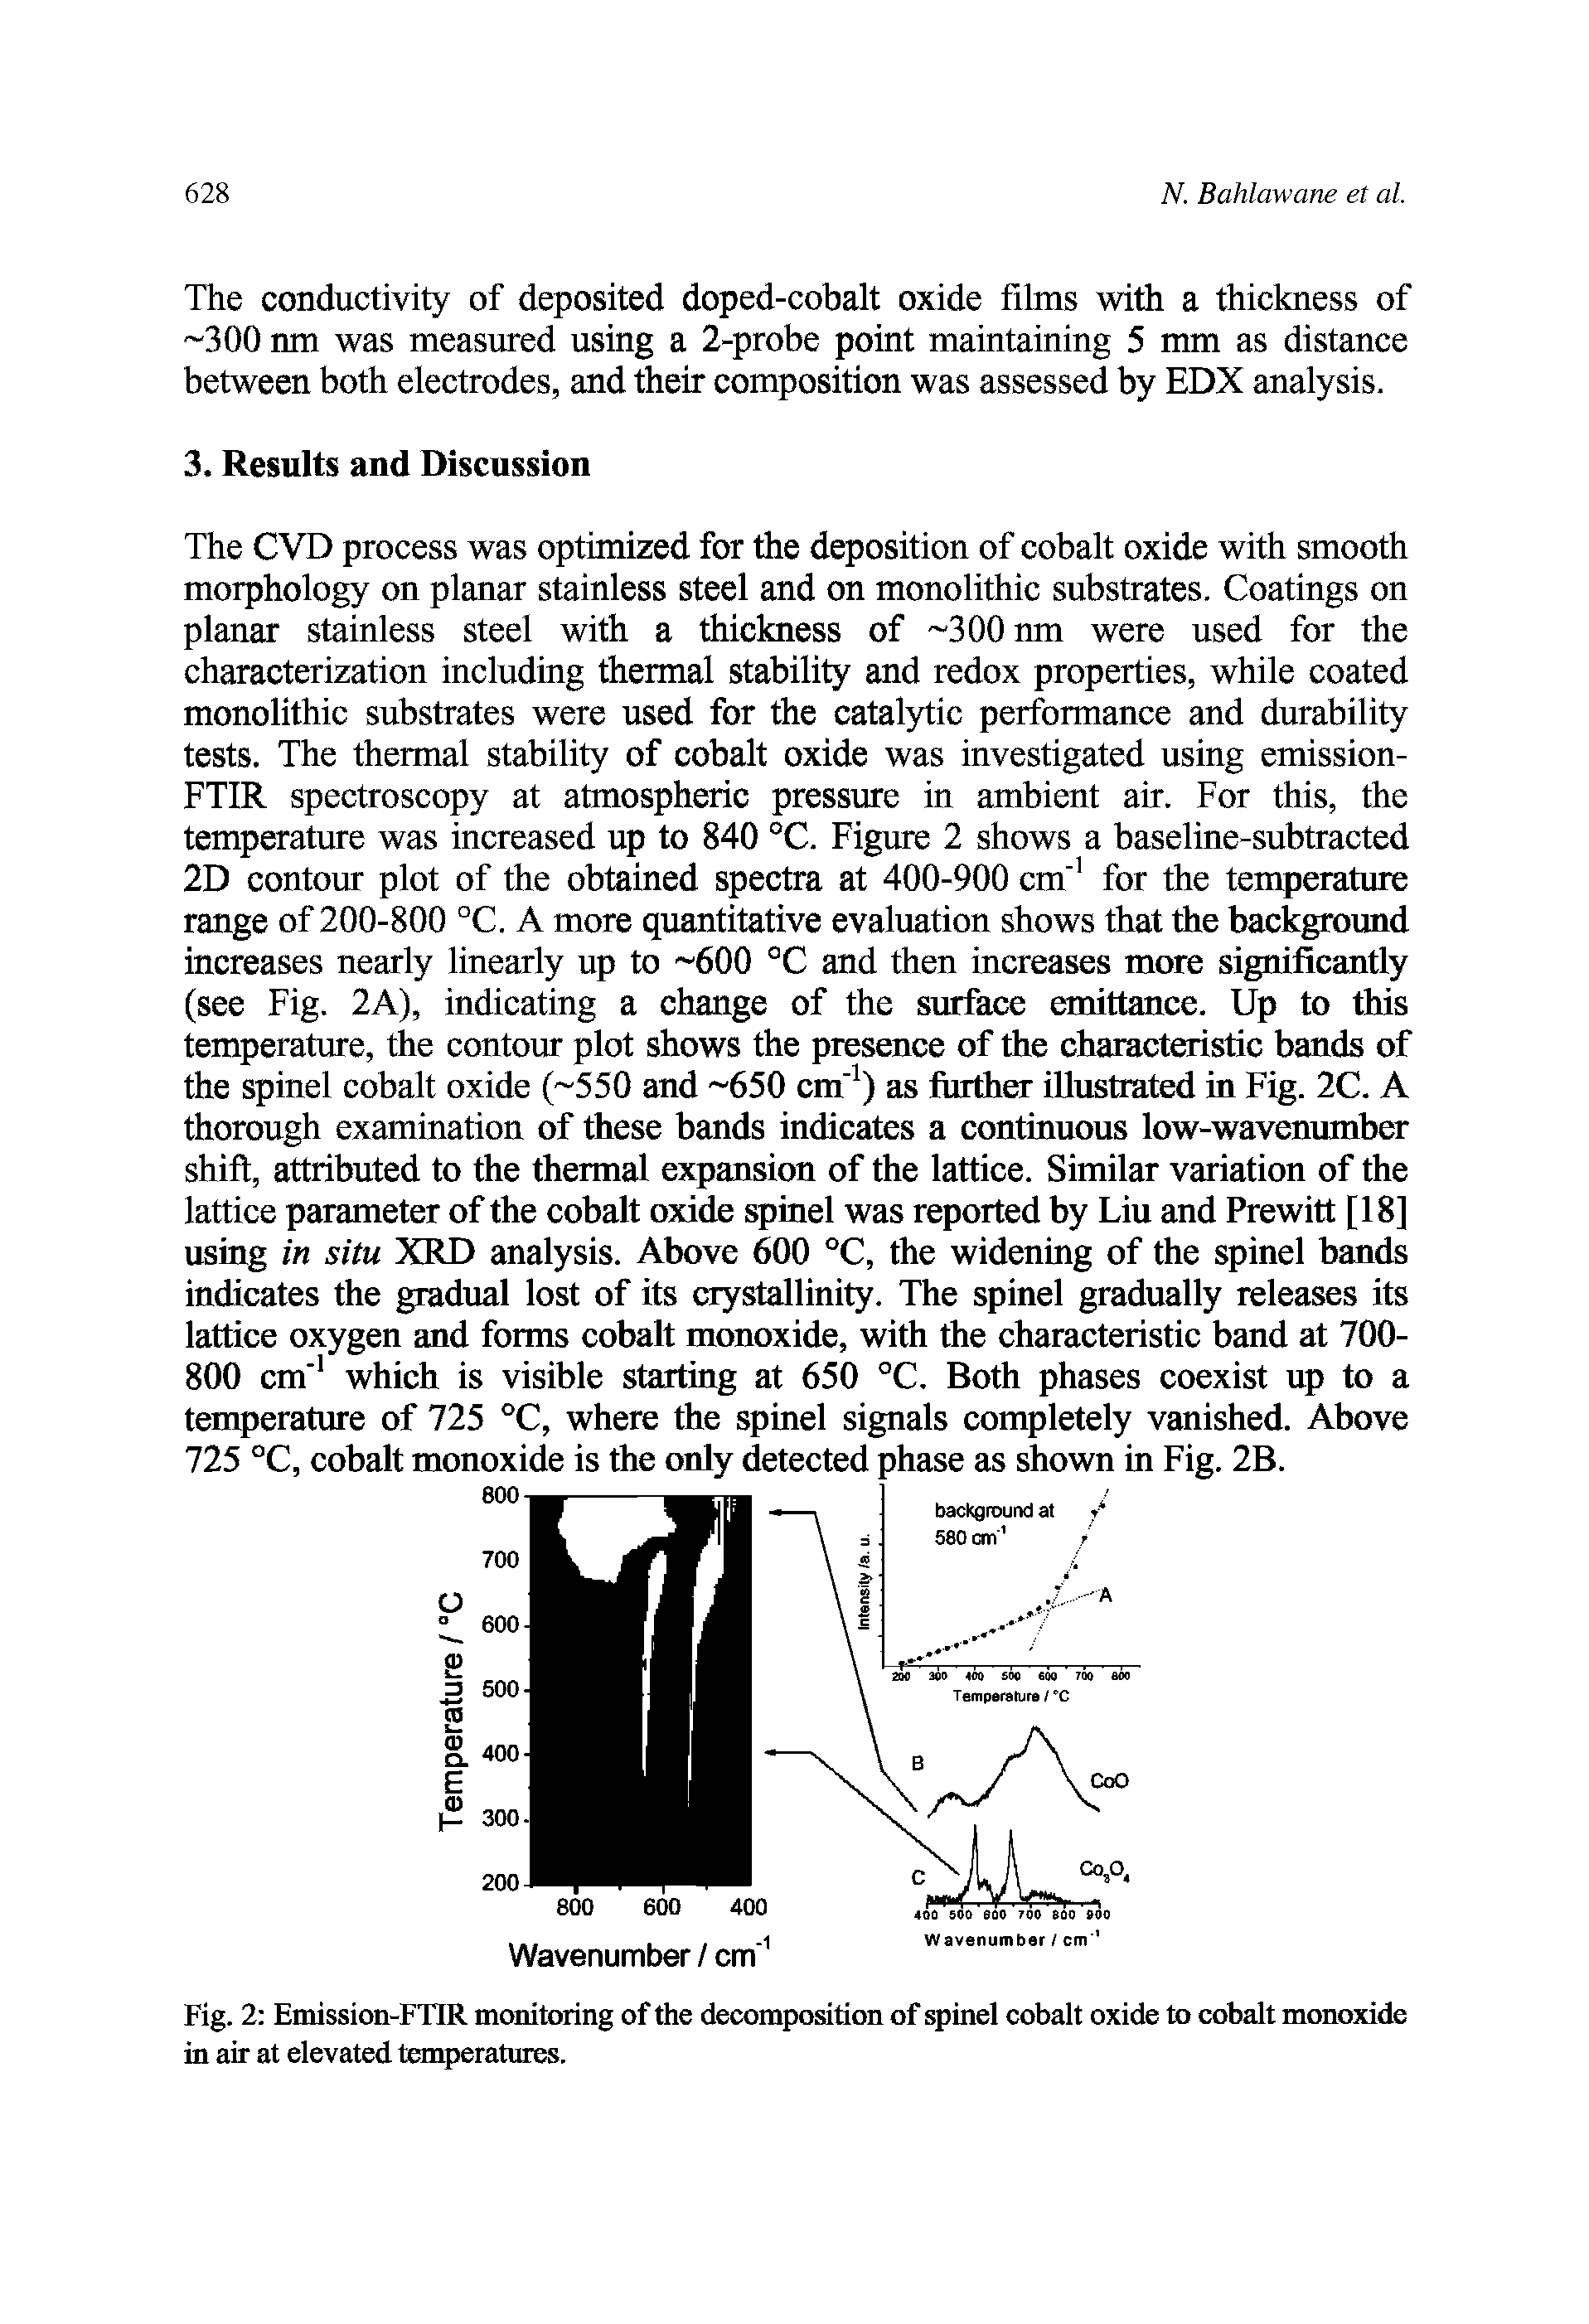 Fig. 2 Emission-FTIR monitoring of the decomposition of spinel cobalt oxide to cobalt monoxide in air at elevated temperatures.